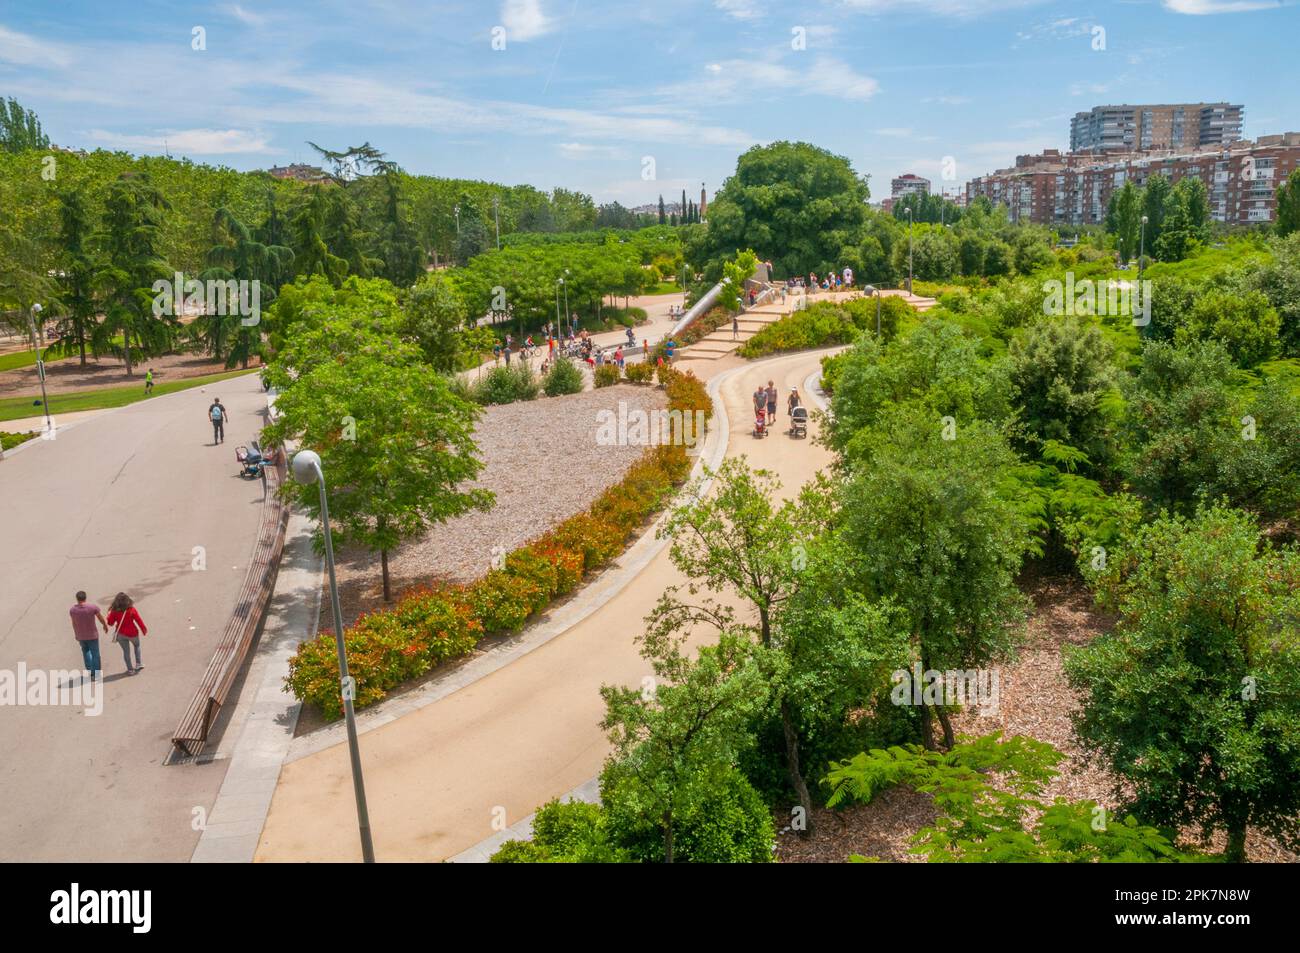 Overview. Madrid Rio park, Madrid, Spain. Stock Photo